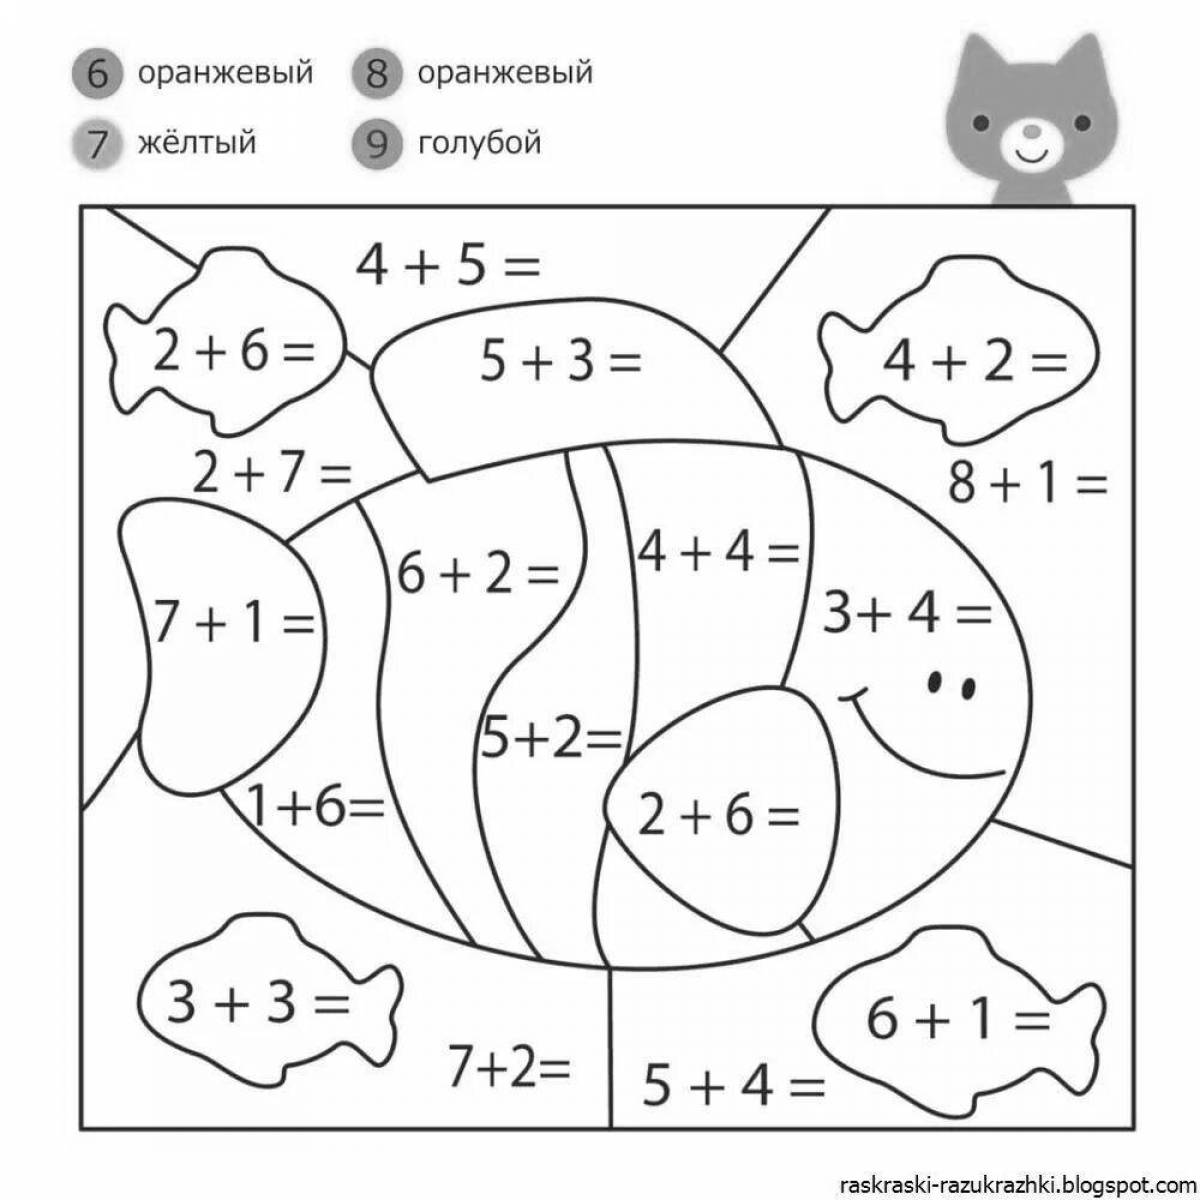 Inspirational math coloring book for 6-7 year olds